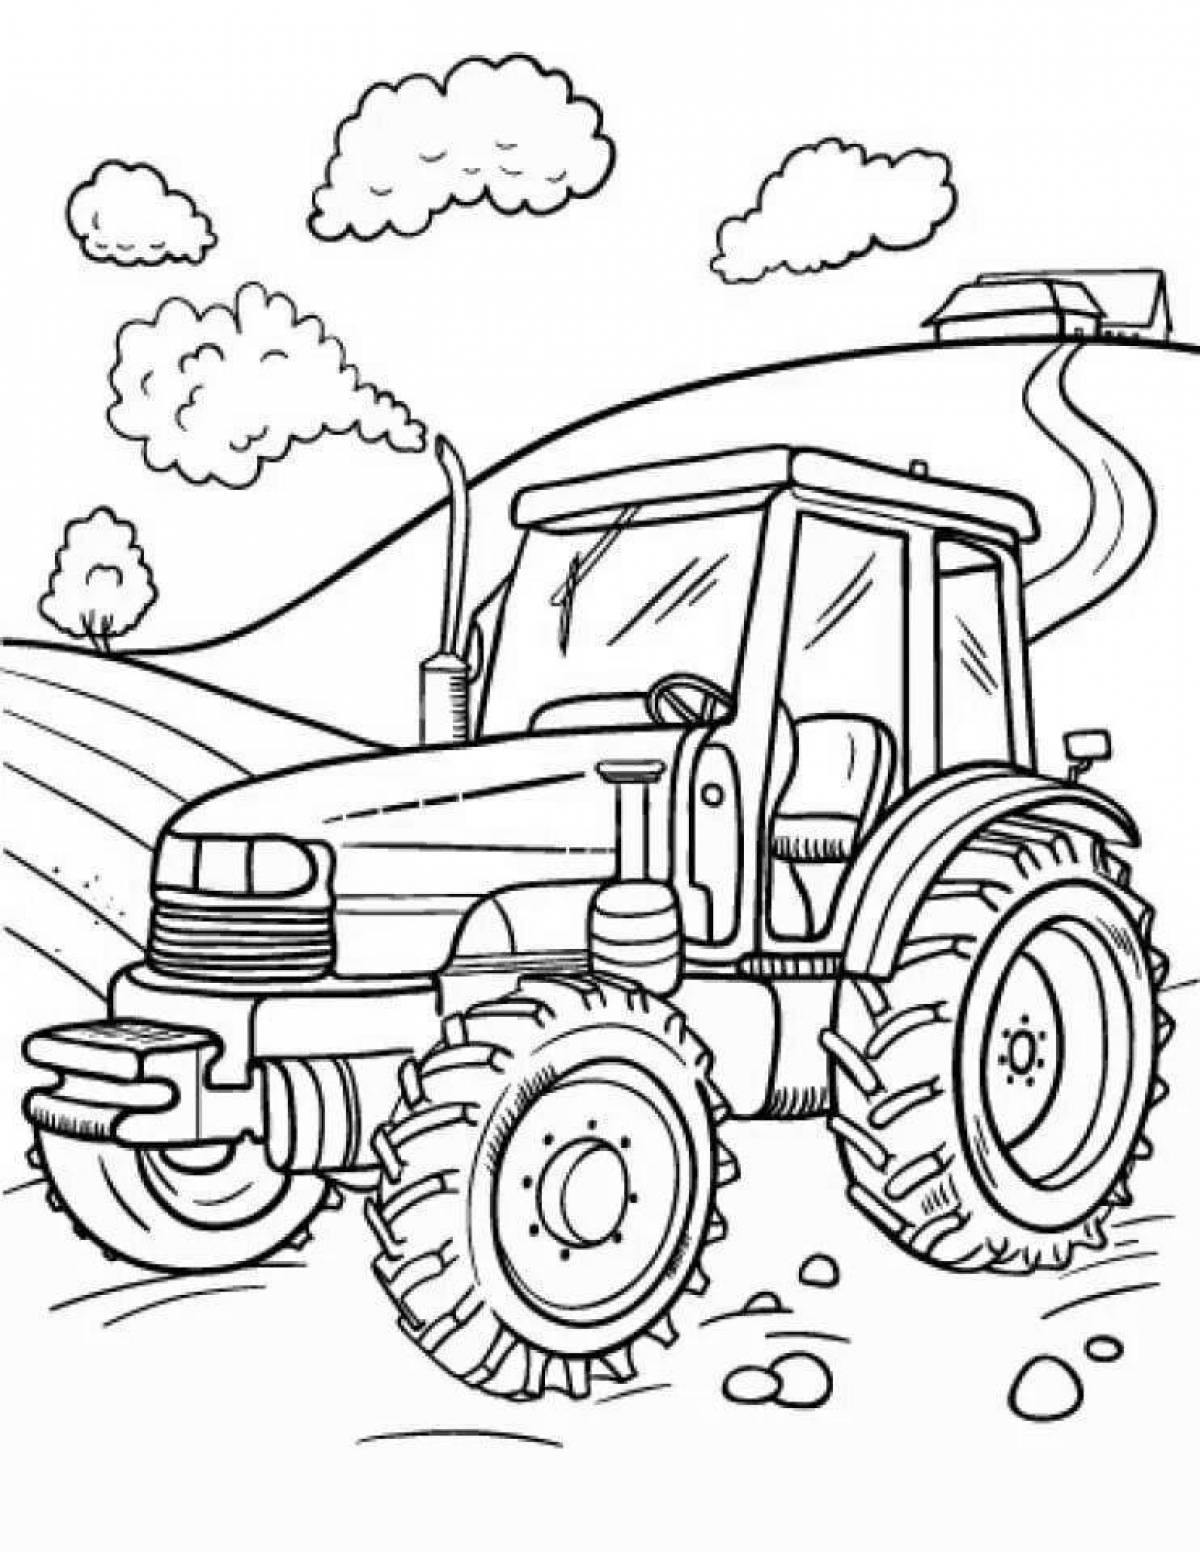 Fun coloring of agricultural machinery